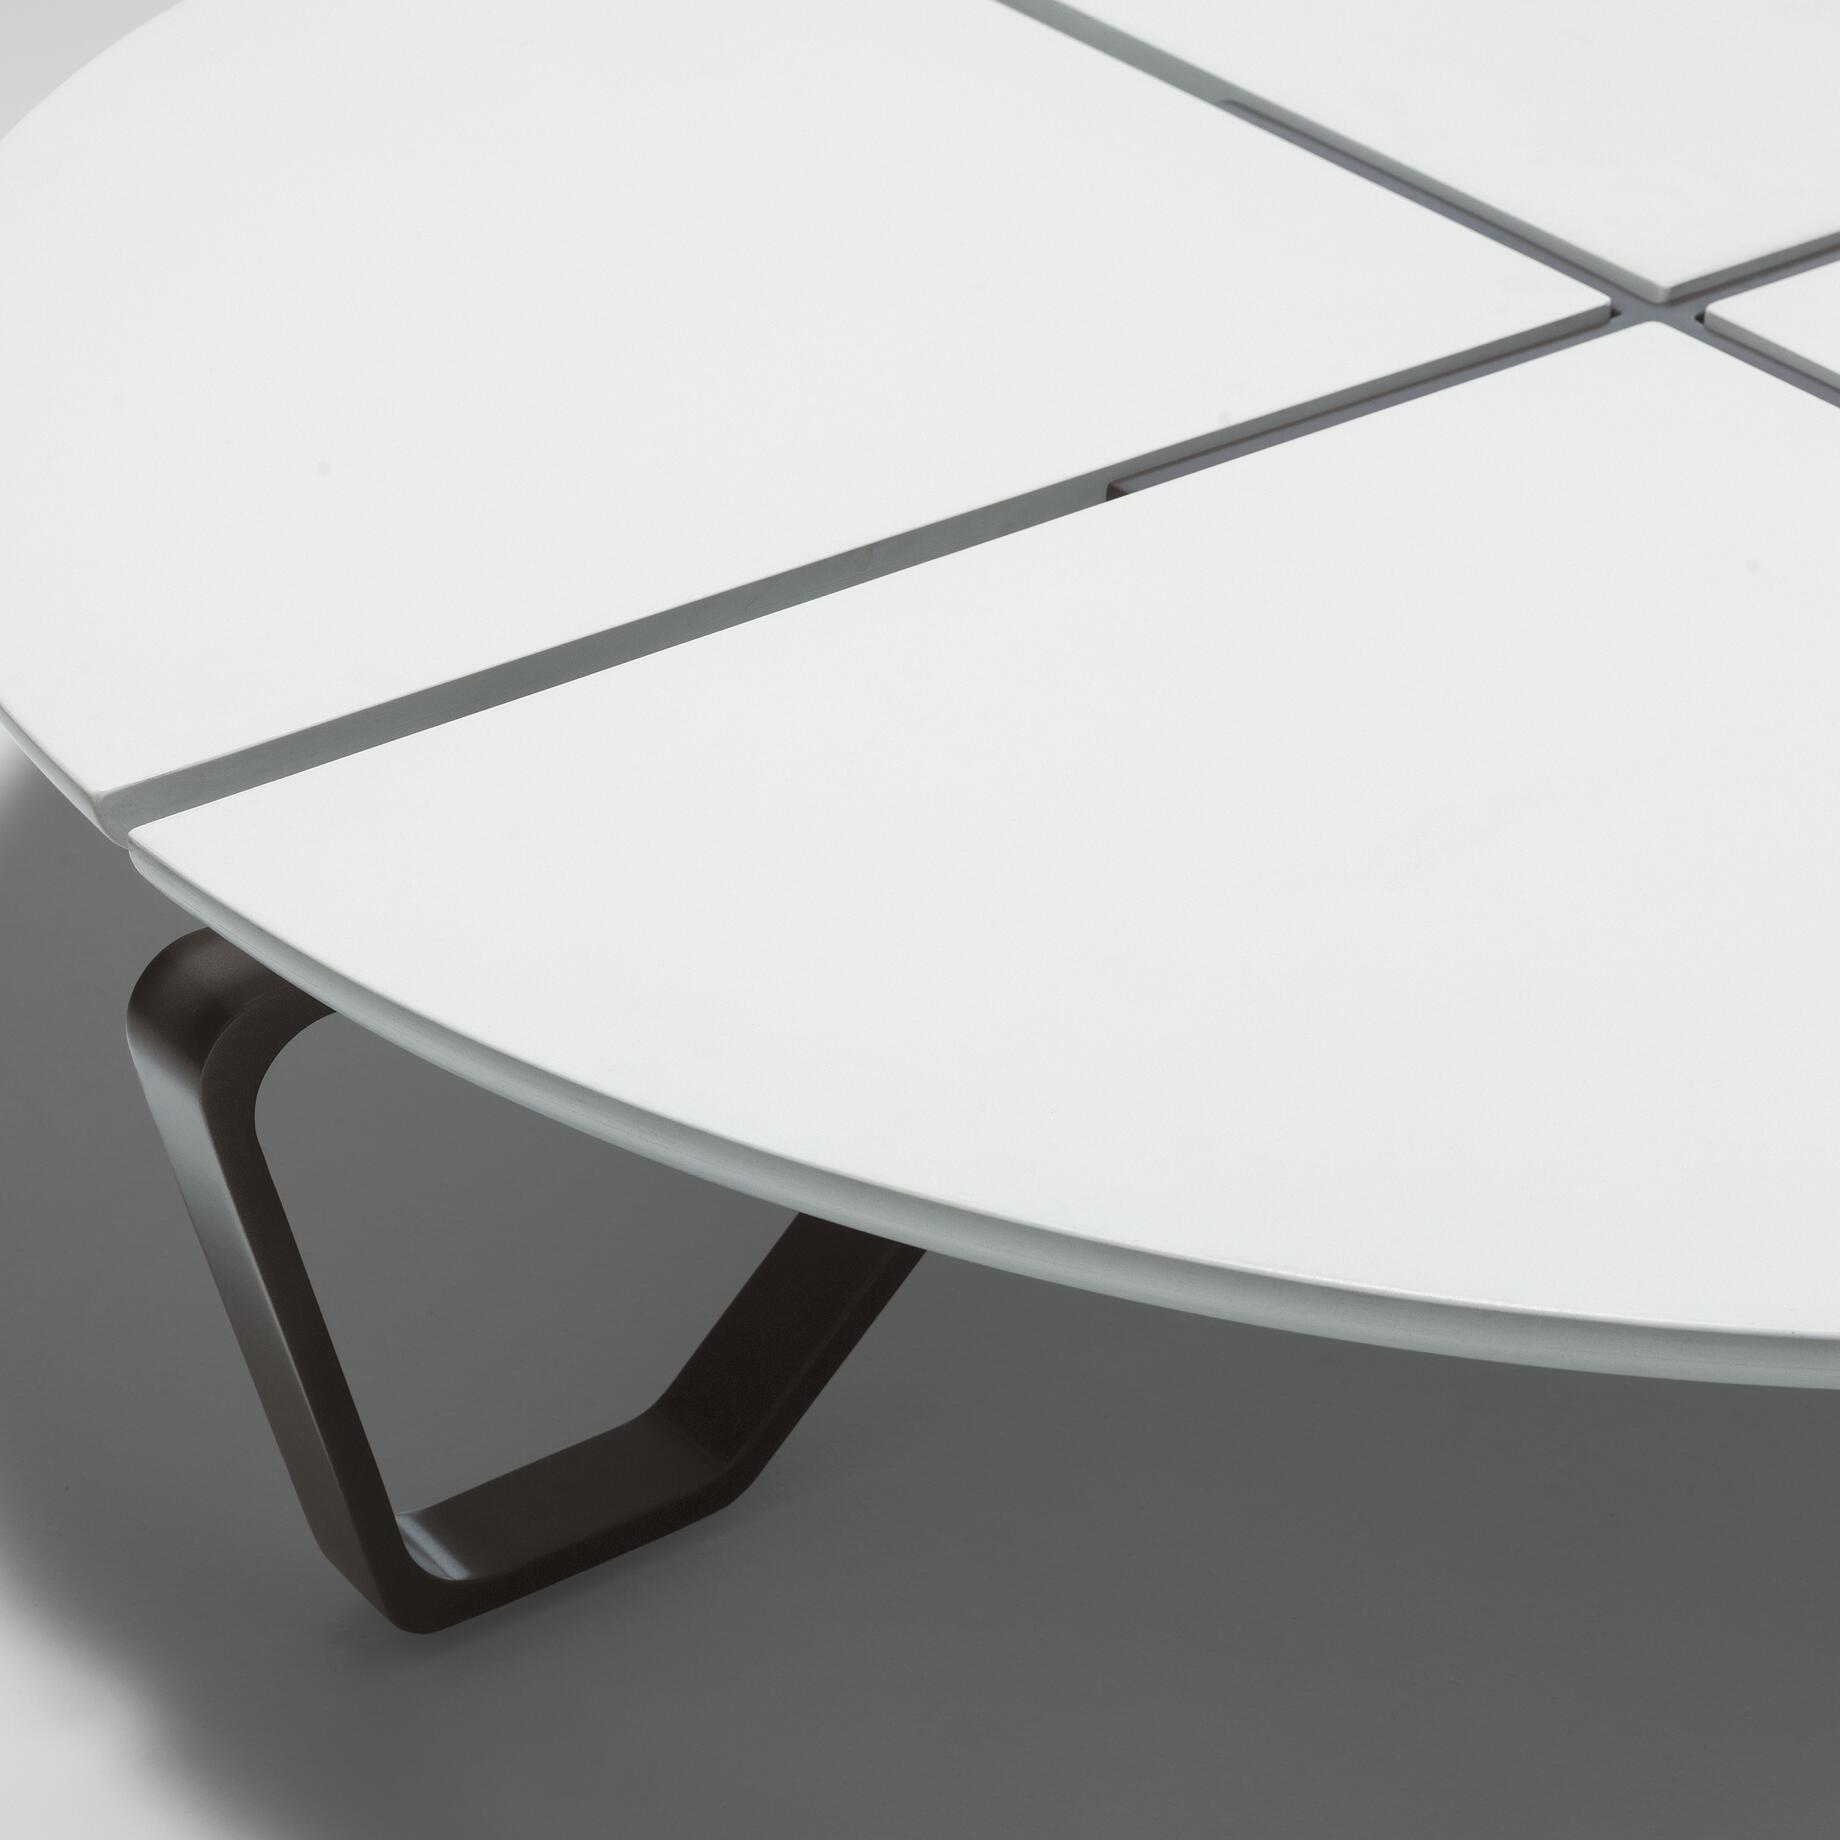 Meduse Round Cocktail Table